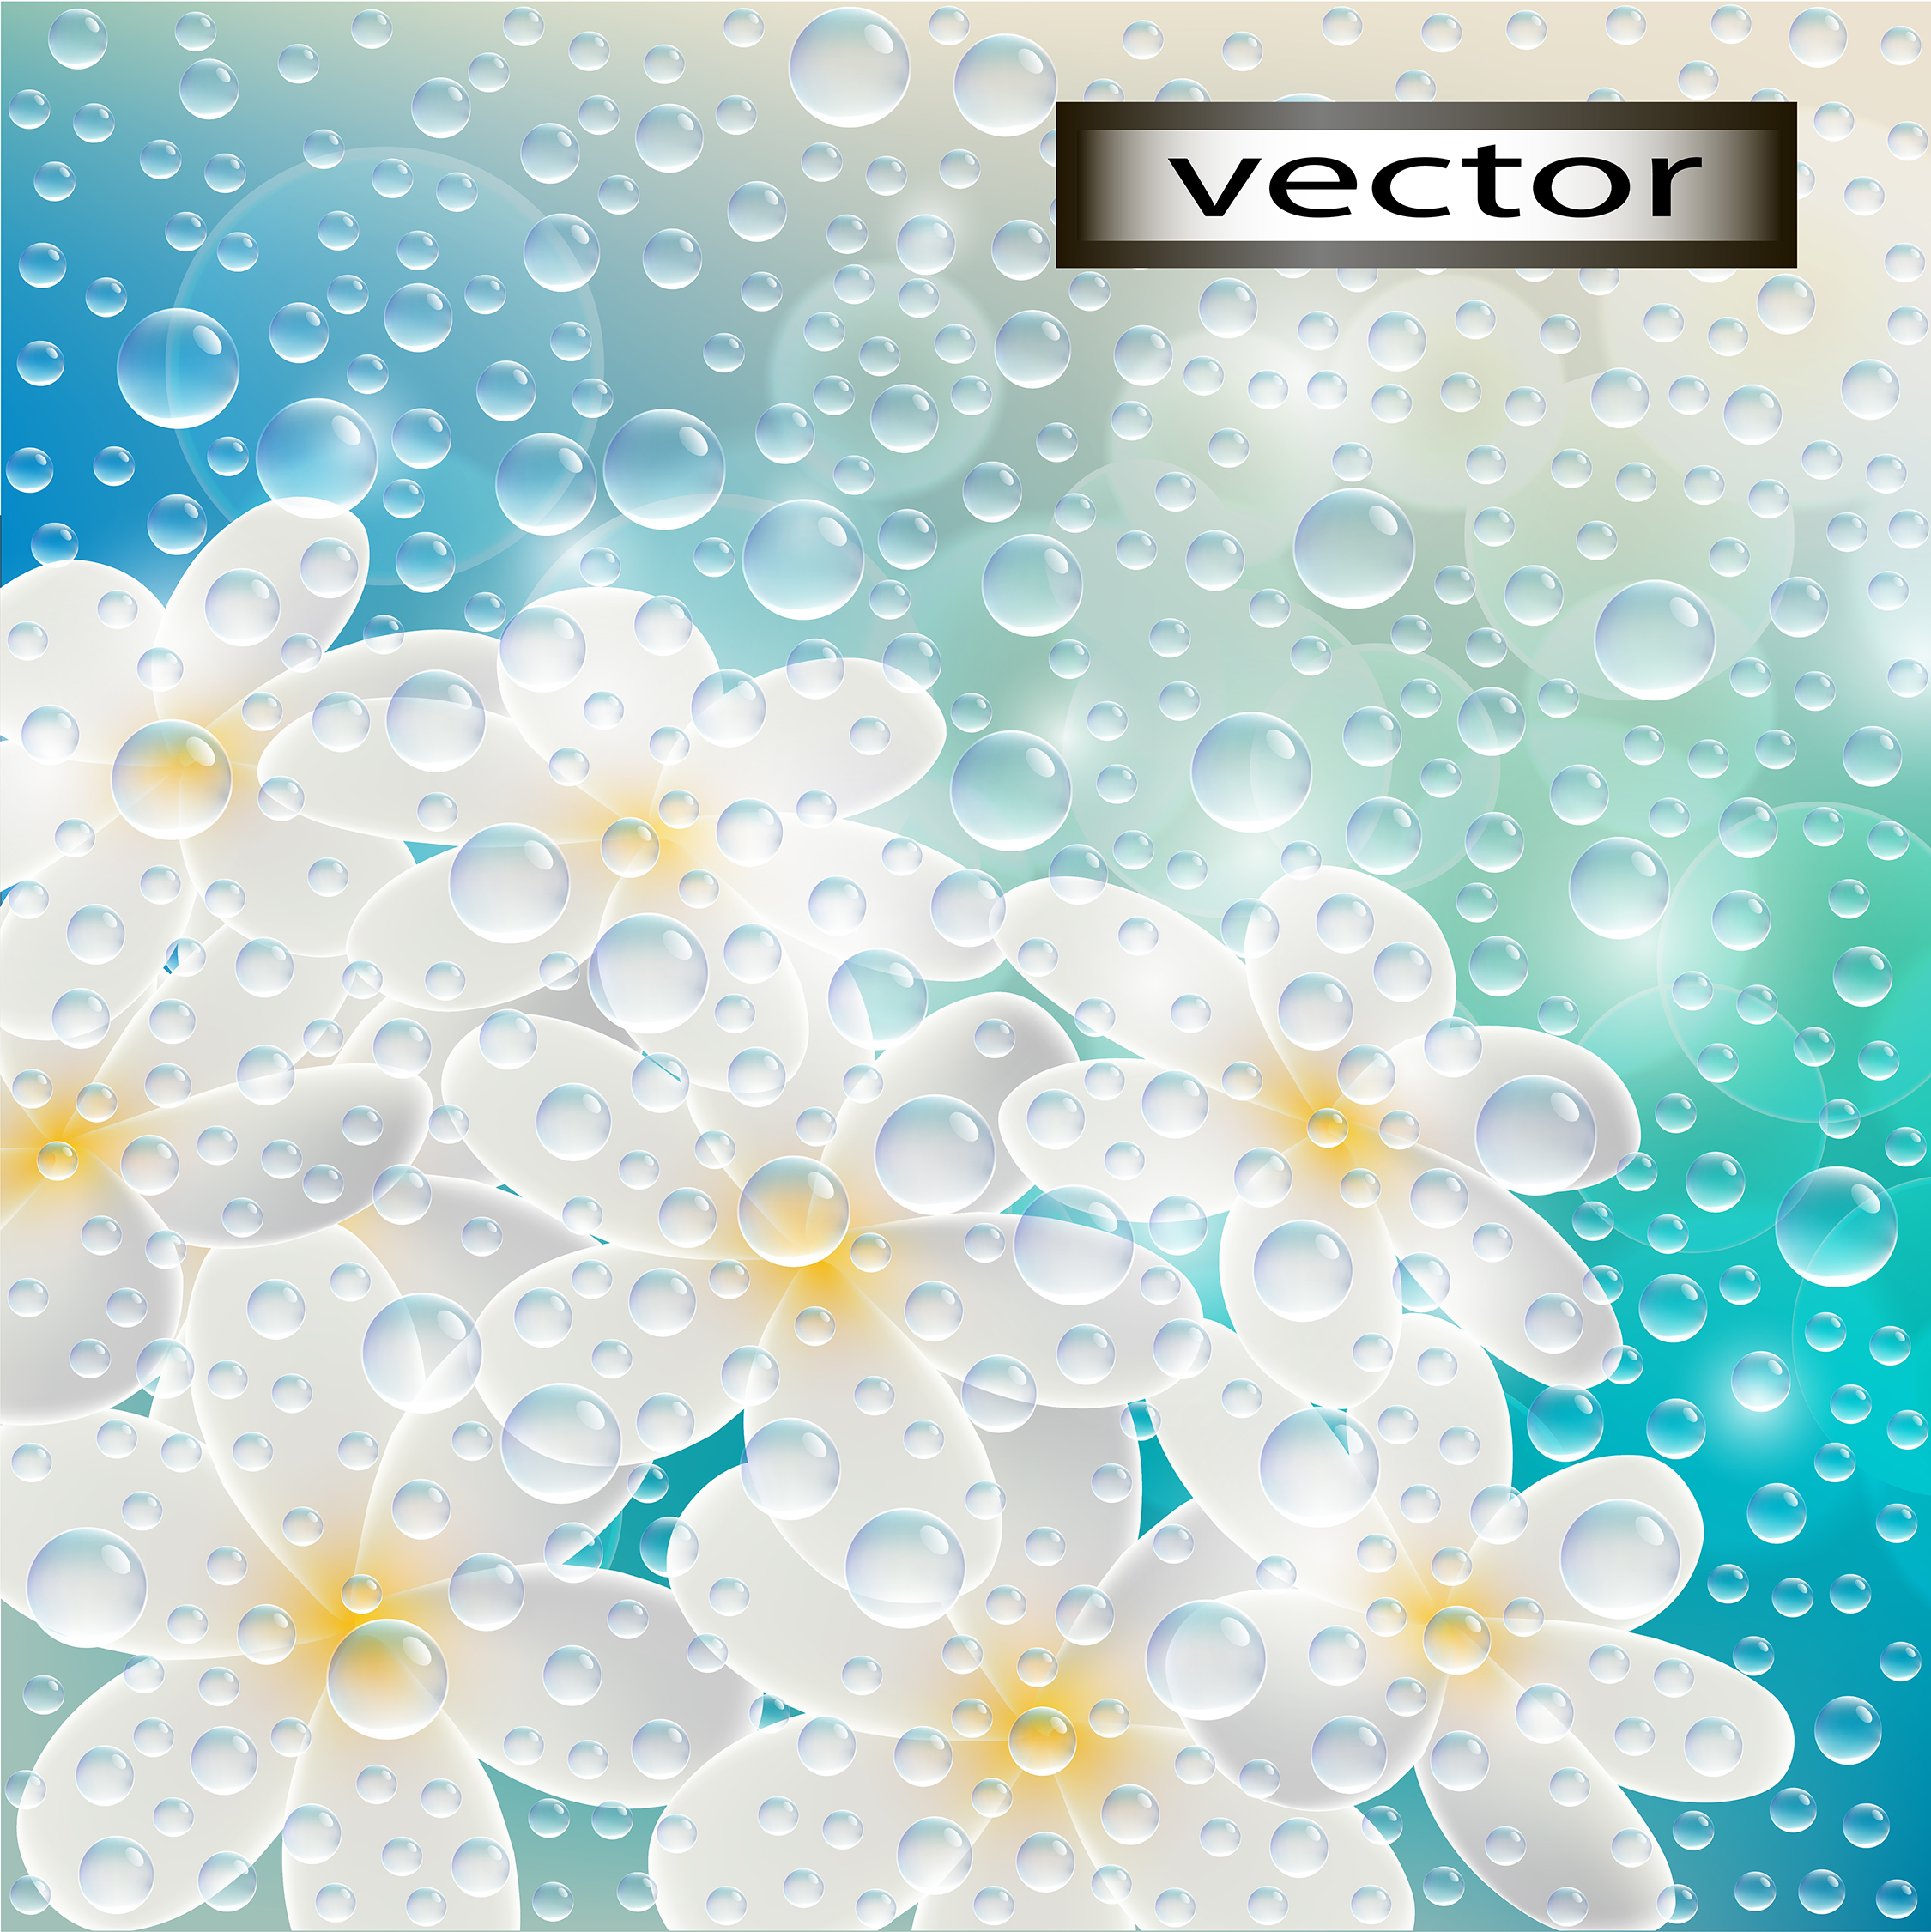 Vector illustration of morning freshness tropical flower in dew drops background  condensation on glass  template for design